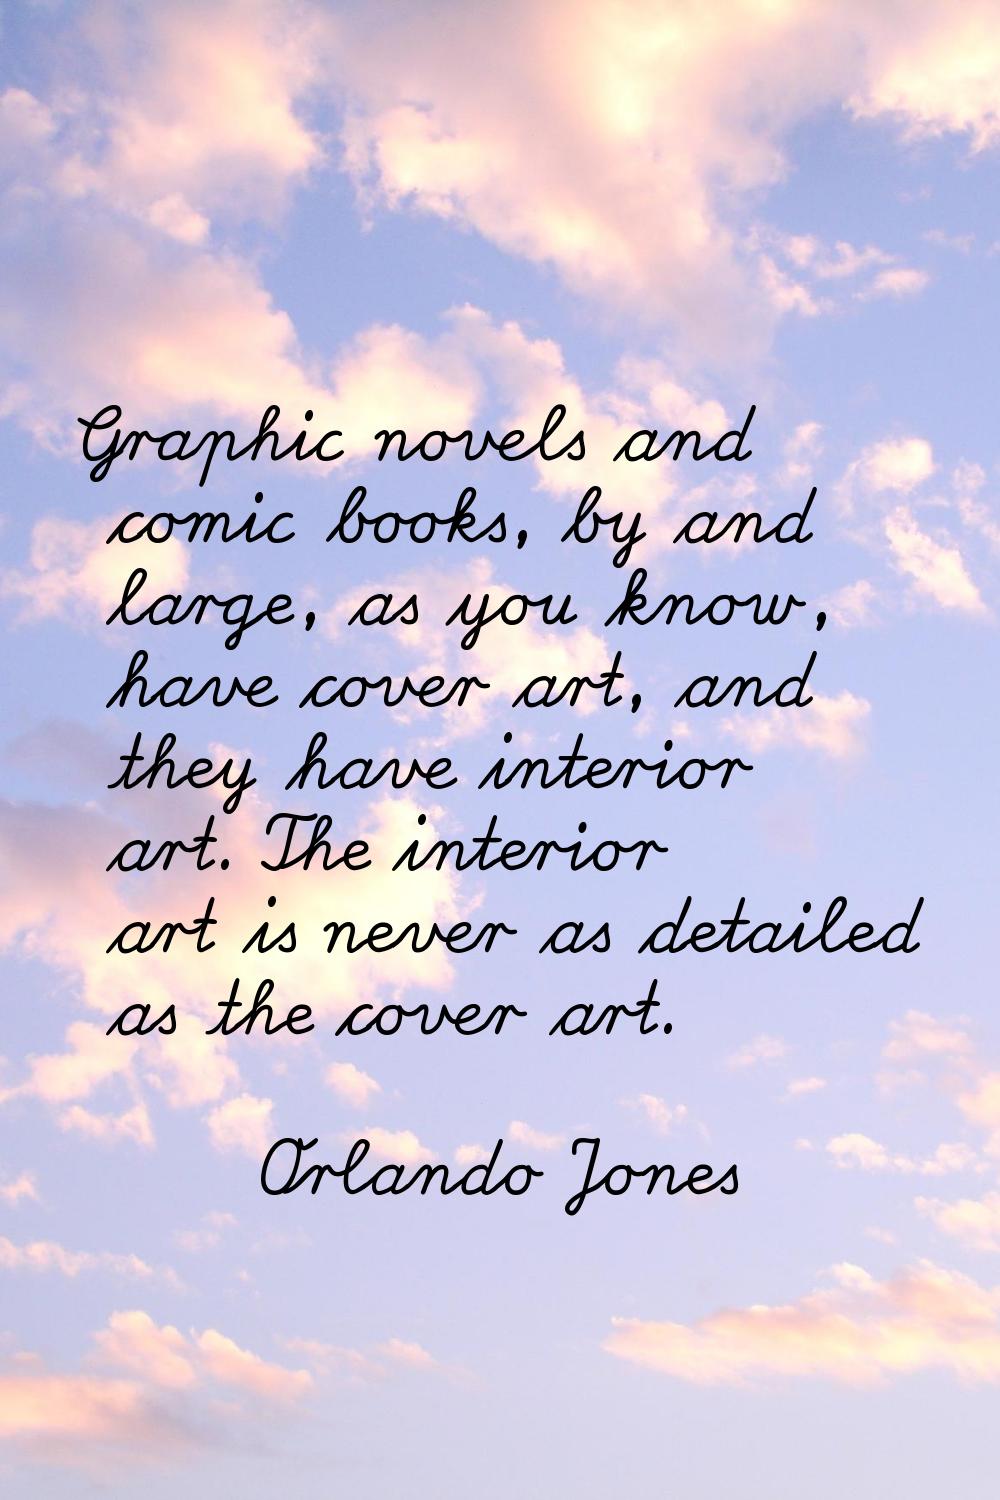 Graphic novels and comic books, by and large, as you know, have cover art, and they have interior a